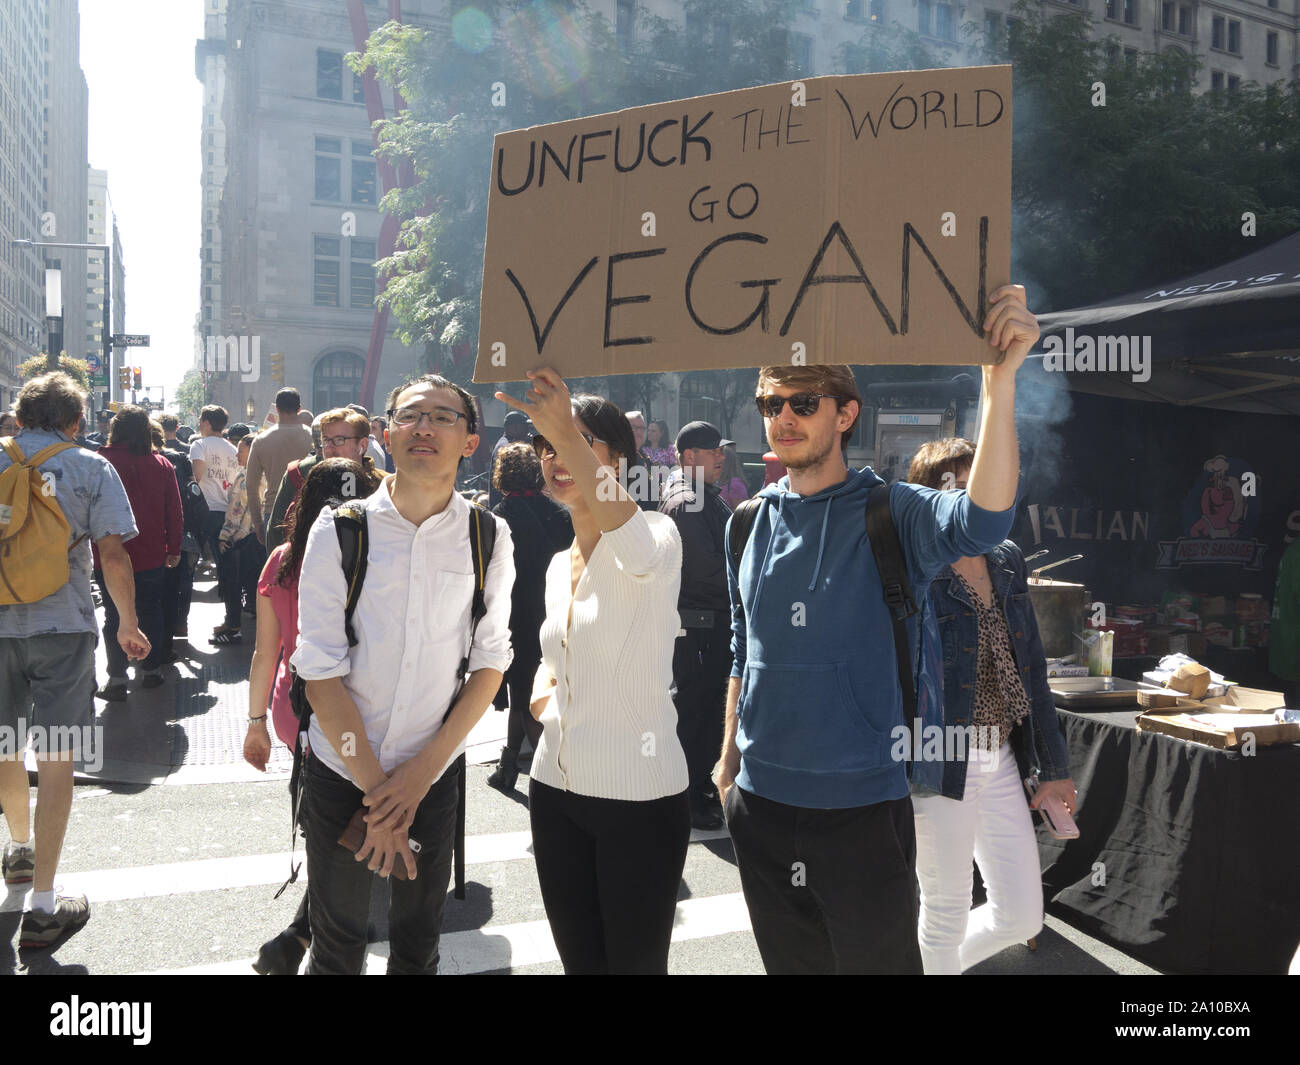 New York City, USA. 20th September, 2019, Climate Strike. Young adults hold sign that urges going Vegan to save the world. Stock Photo